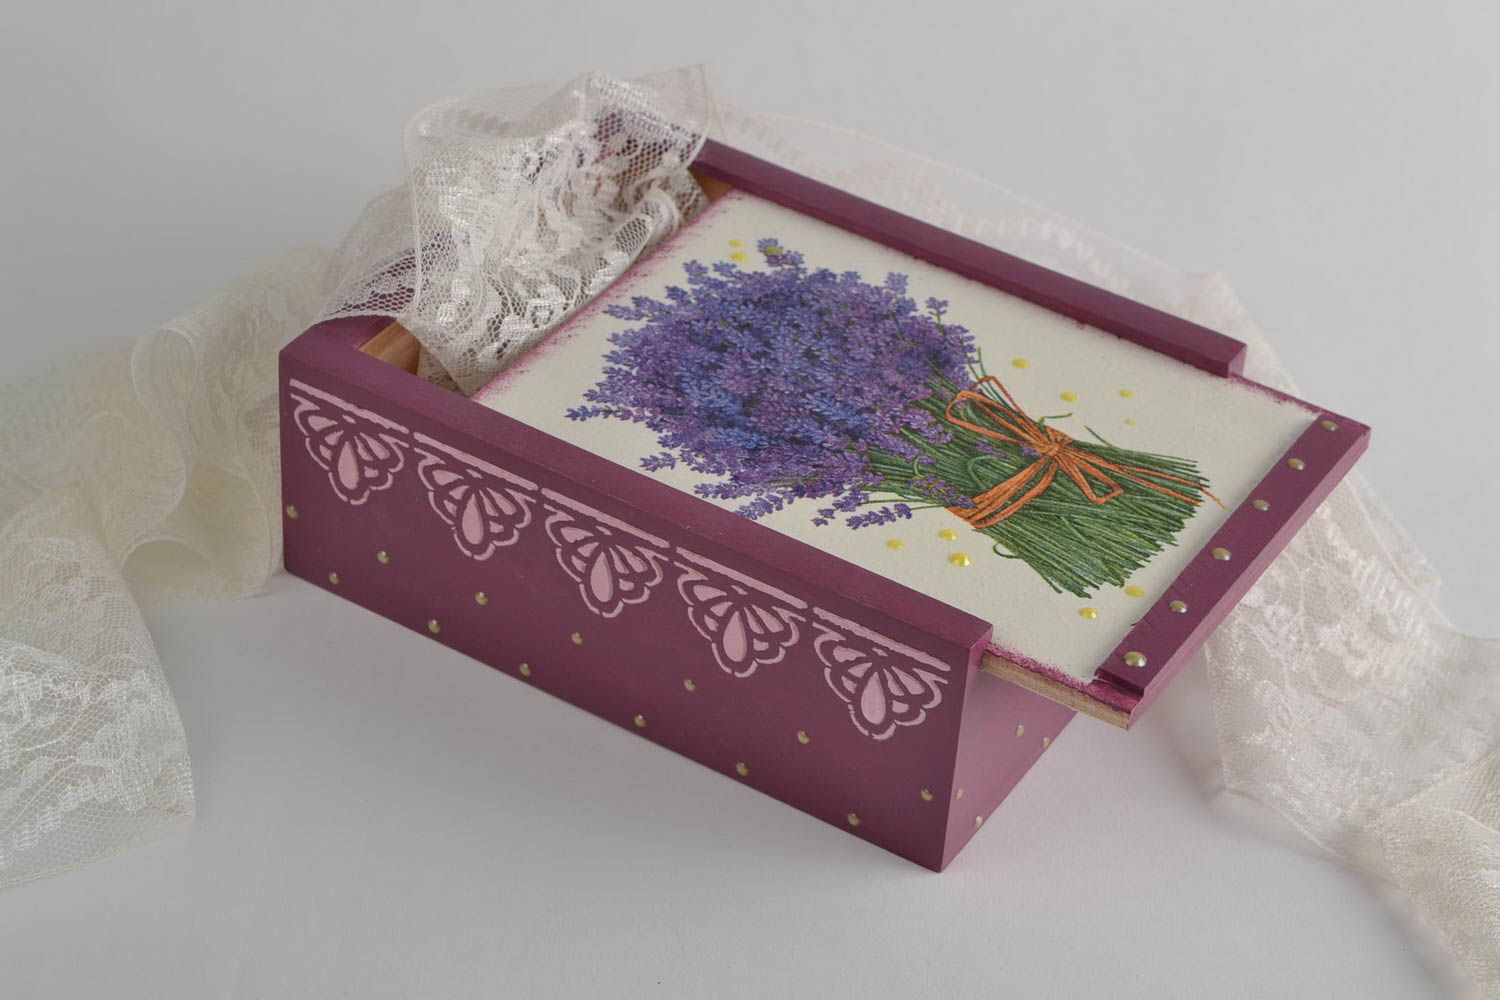 Handmade decorative wooden box with decoupage in Provence style Lavender photo 1